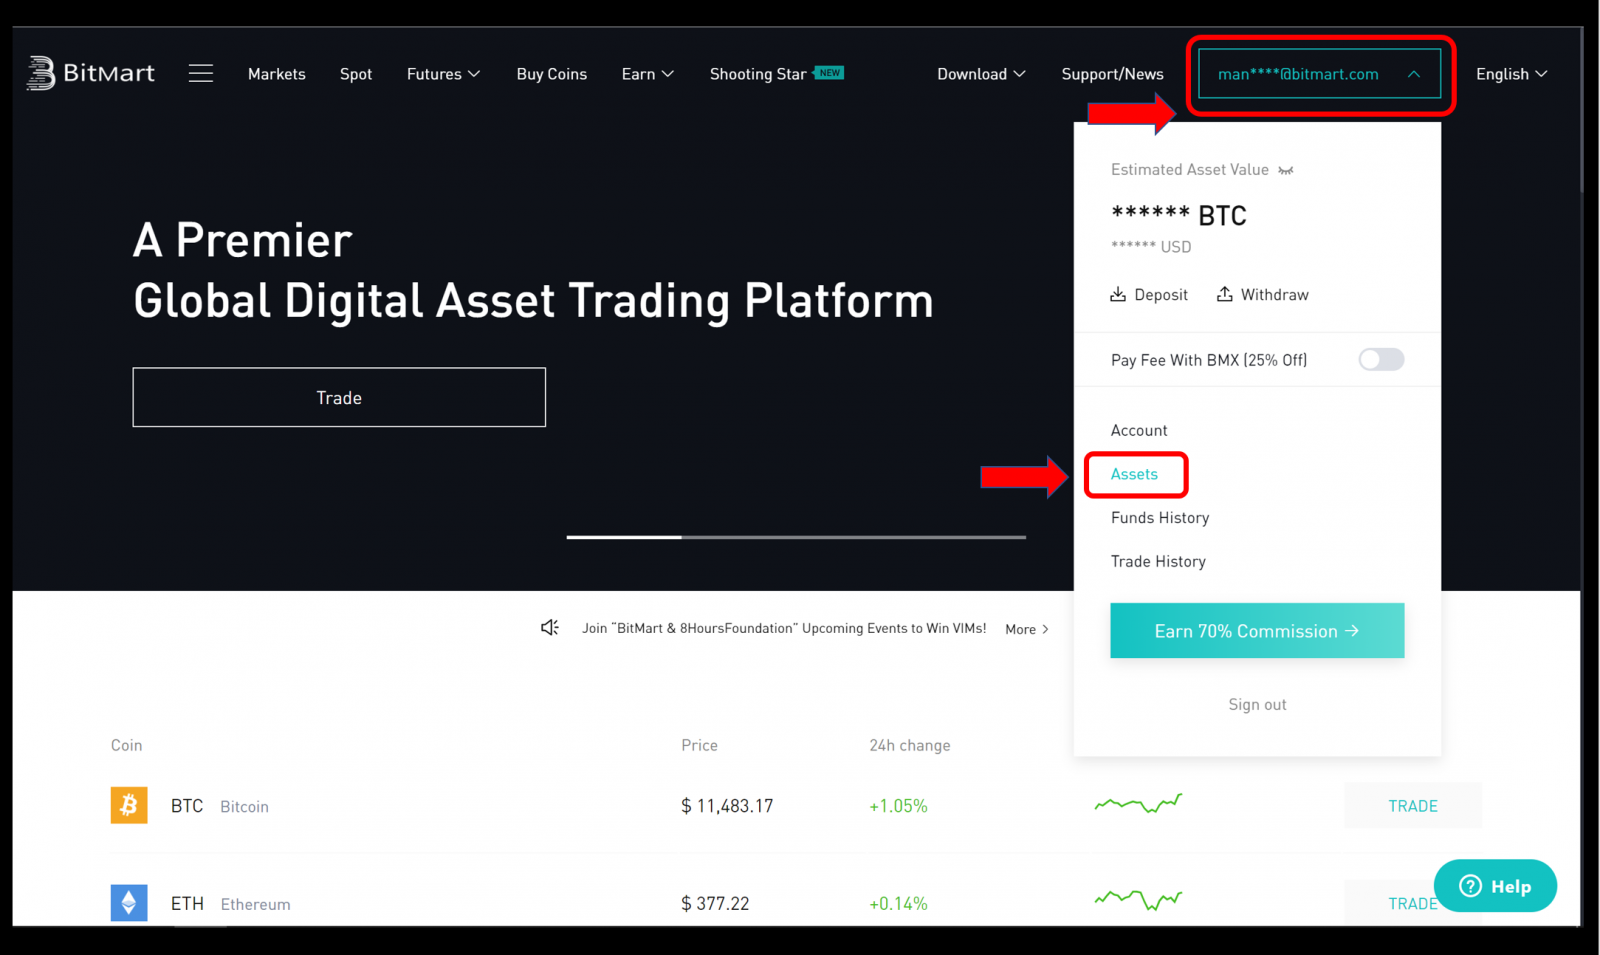 How to Register and Verify Account in BitMart